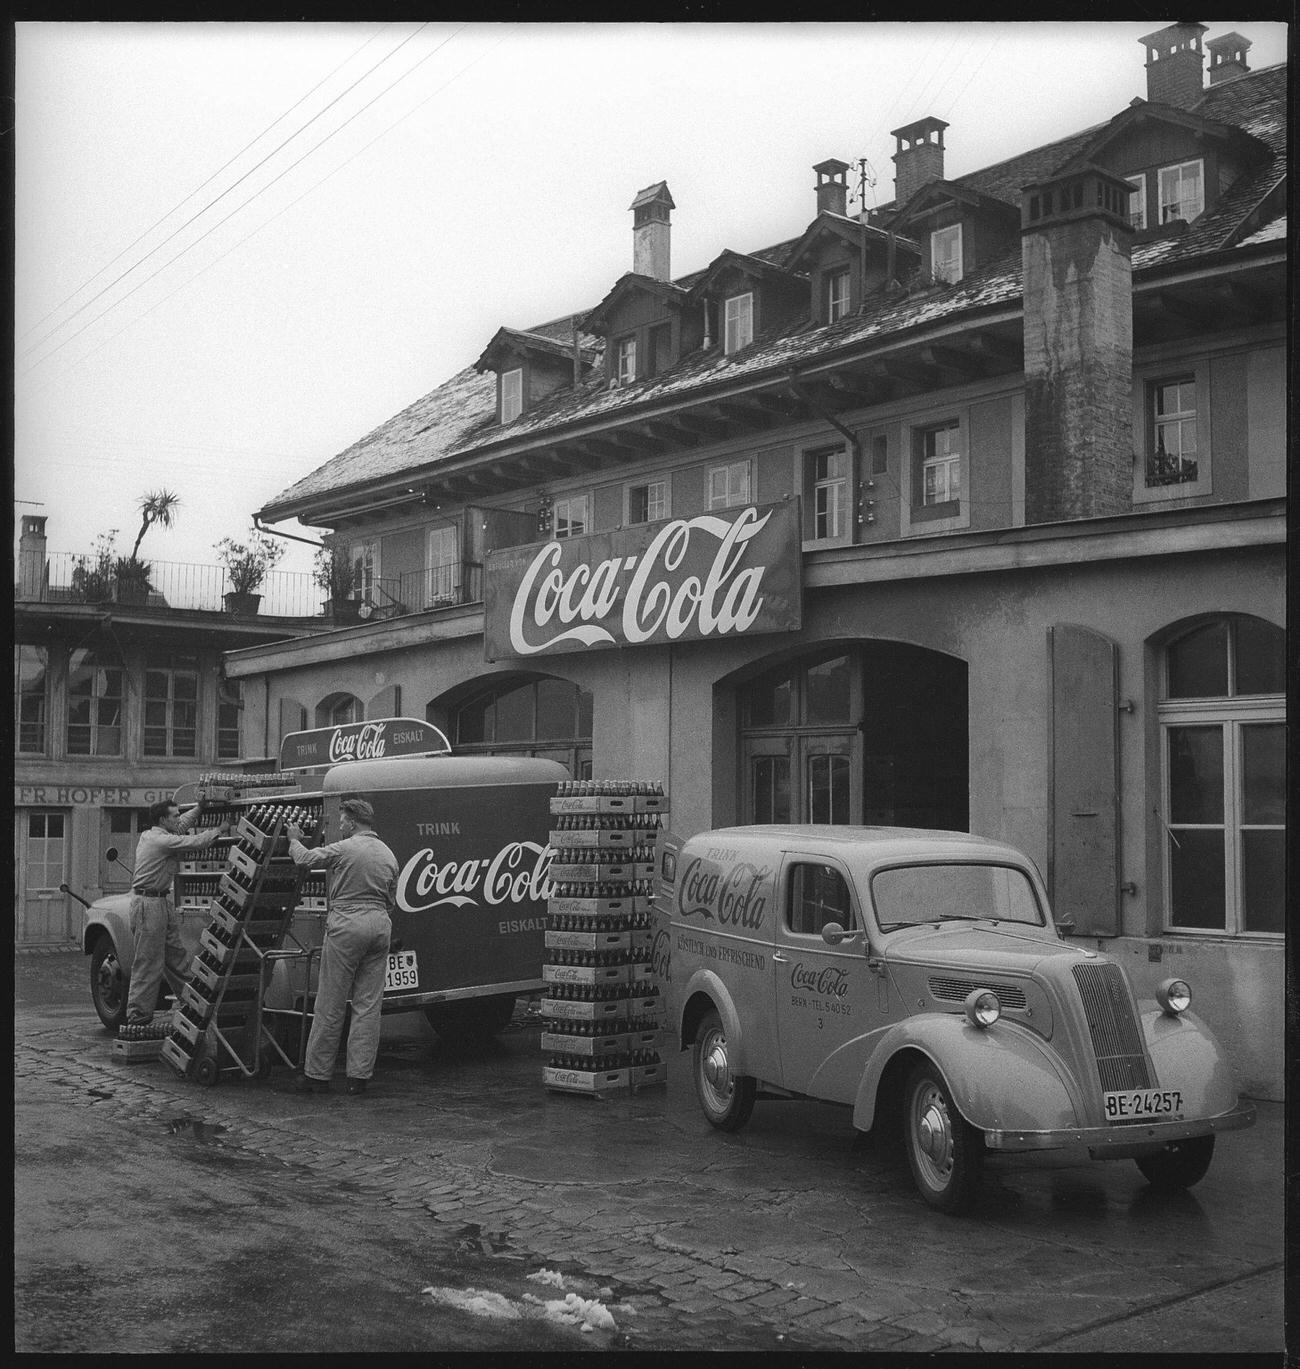 Coca-Cola delivery vans being loaded in Bern, 1949.